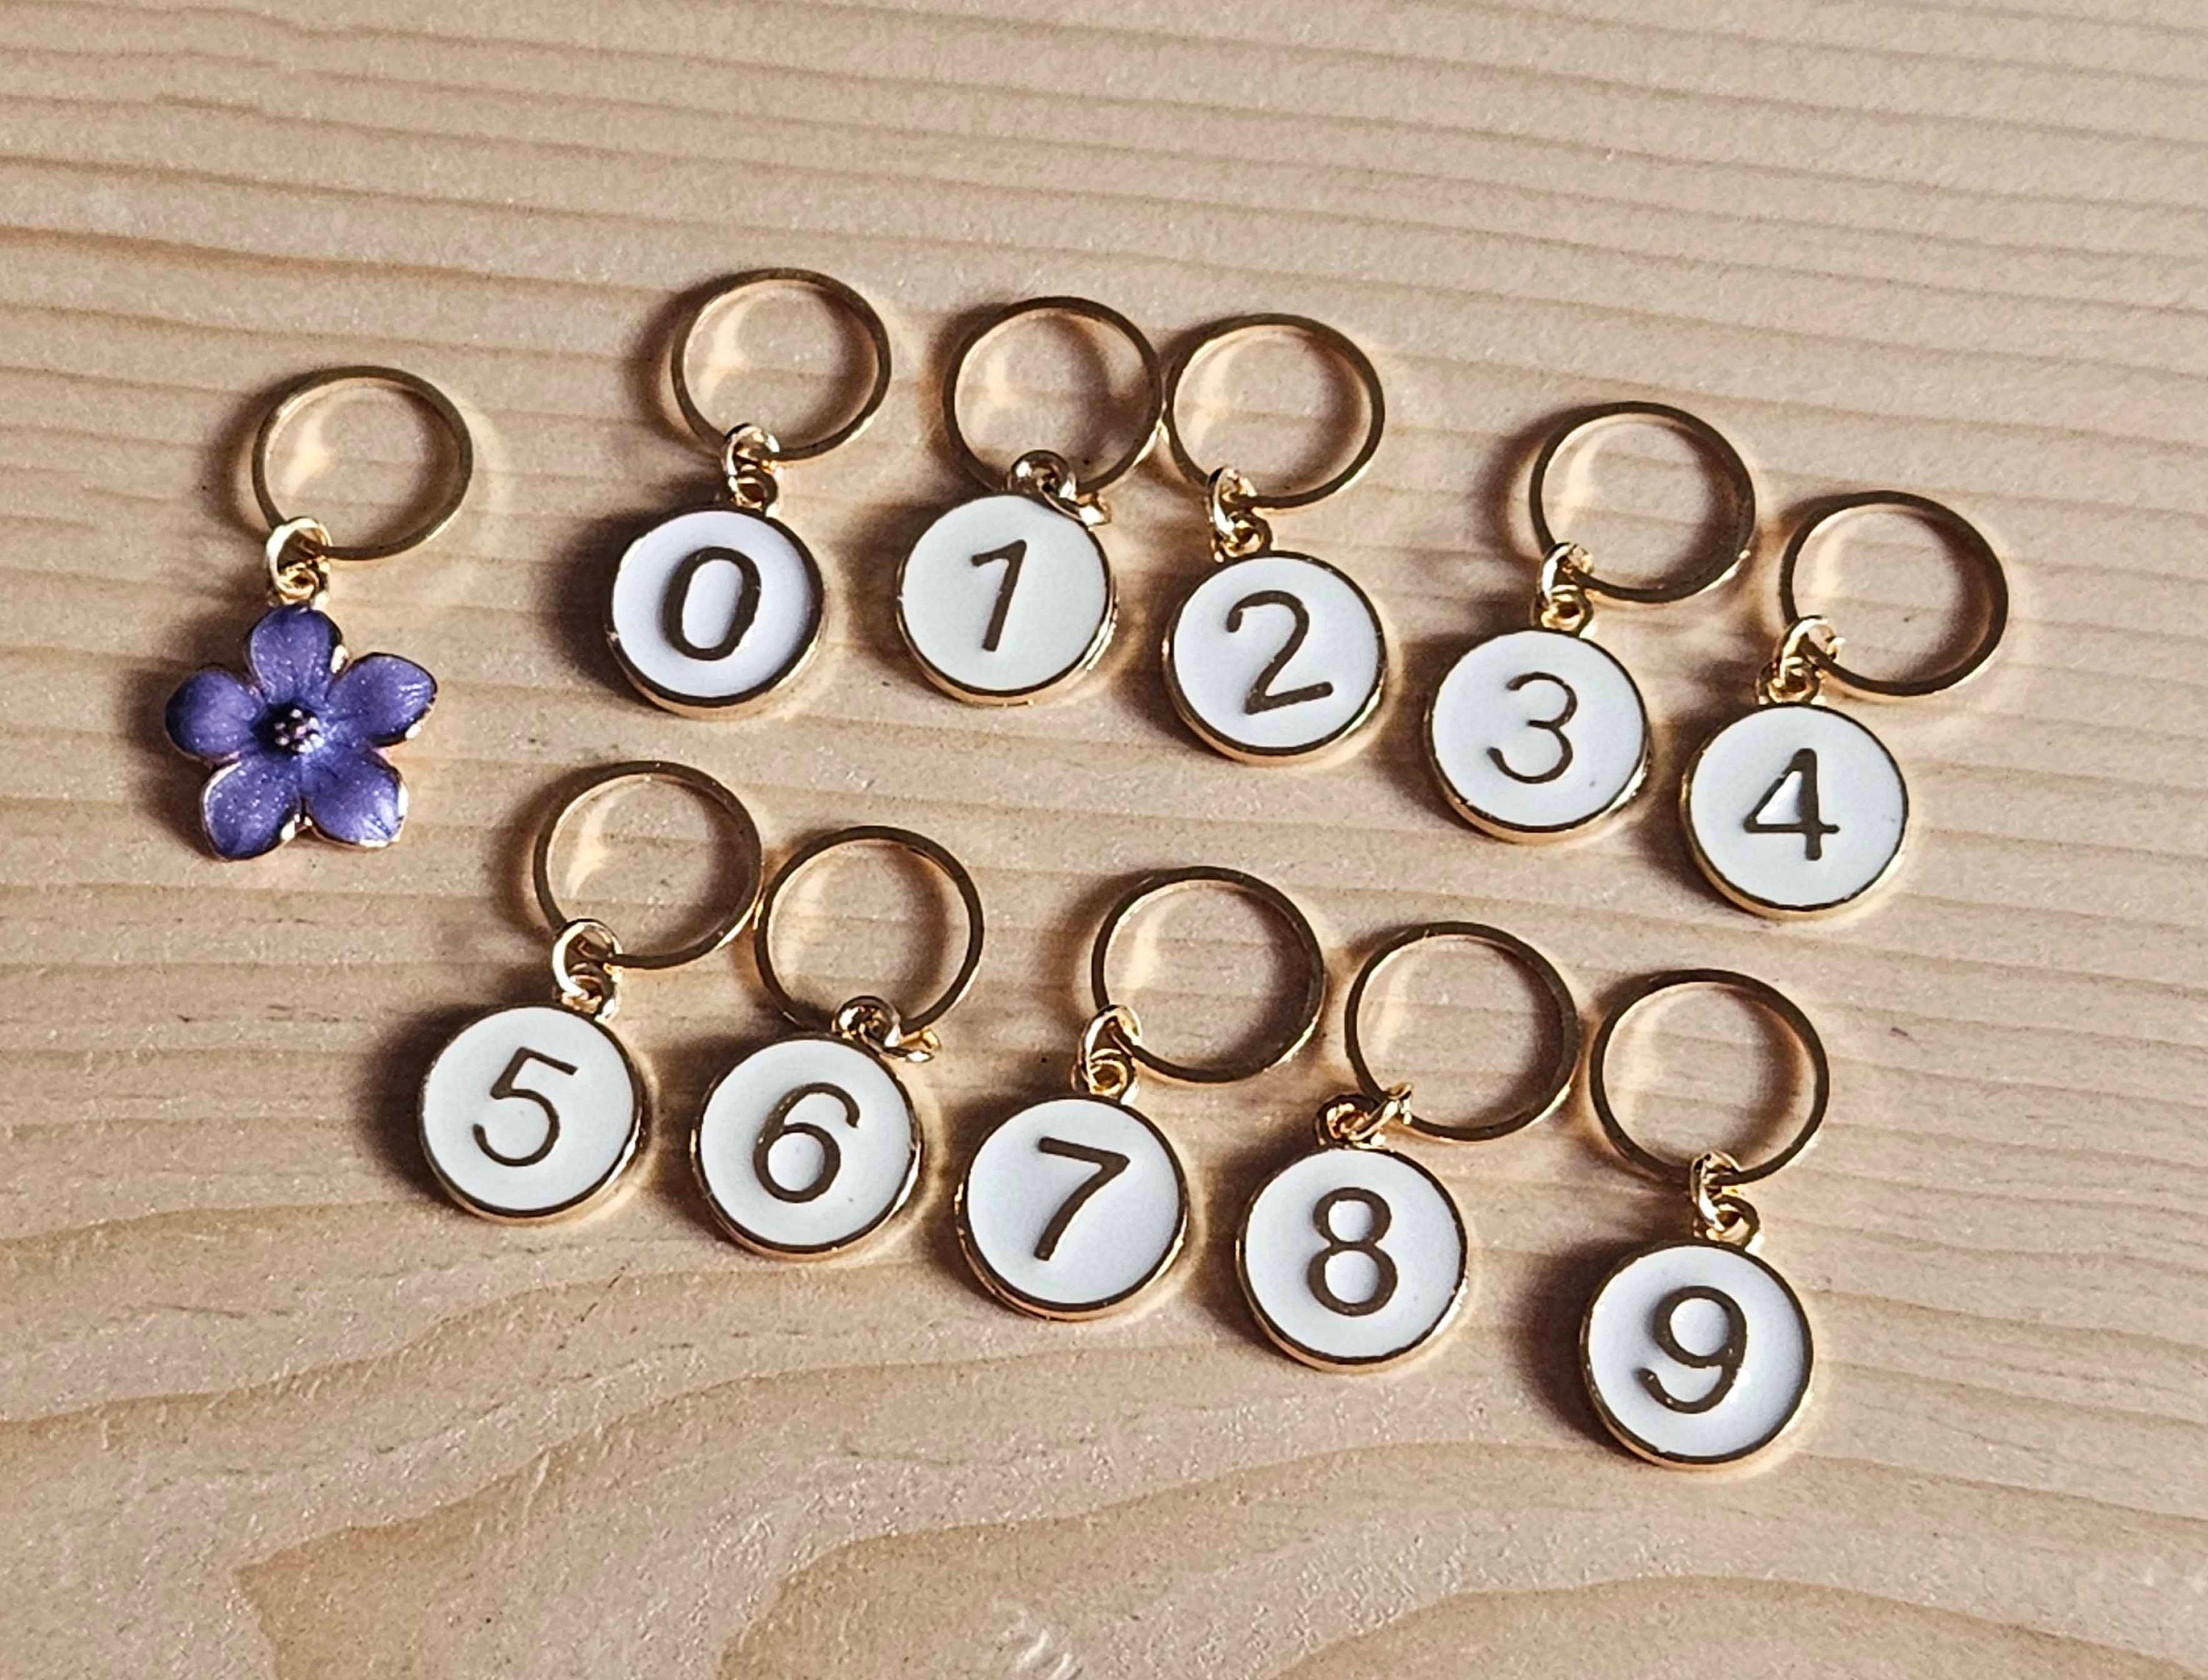 DoreenBeads 0 to 9 Numbers Stitch Marker Charms for Crocheting and  Knitting, Locking Crochet Stitch Marker with 0-9 Numbers Knitting  Crocheting